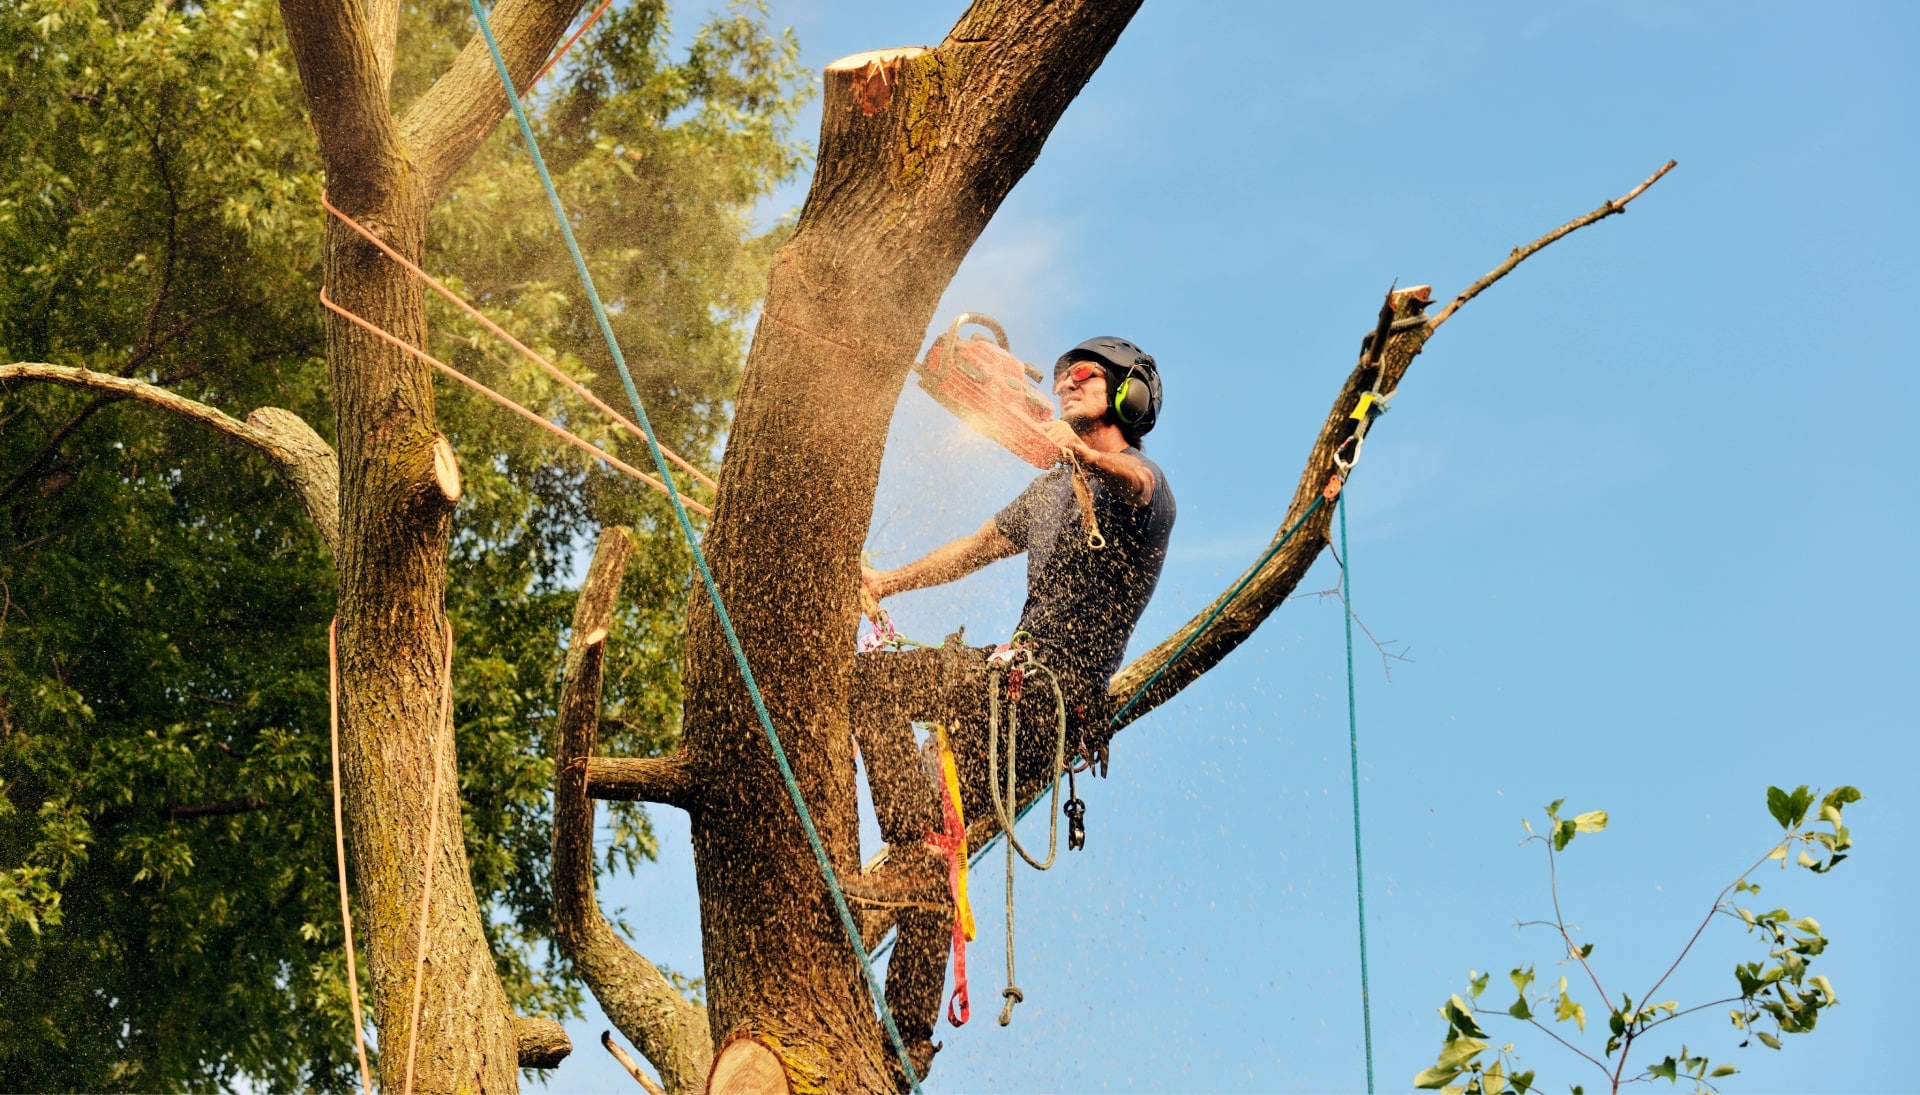 A tree removal consultant uses red saw for San Jose, California property